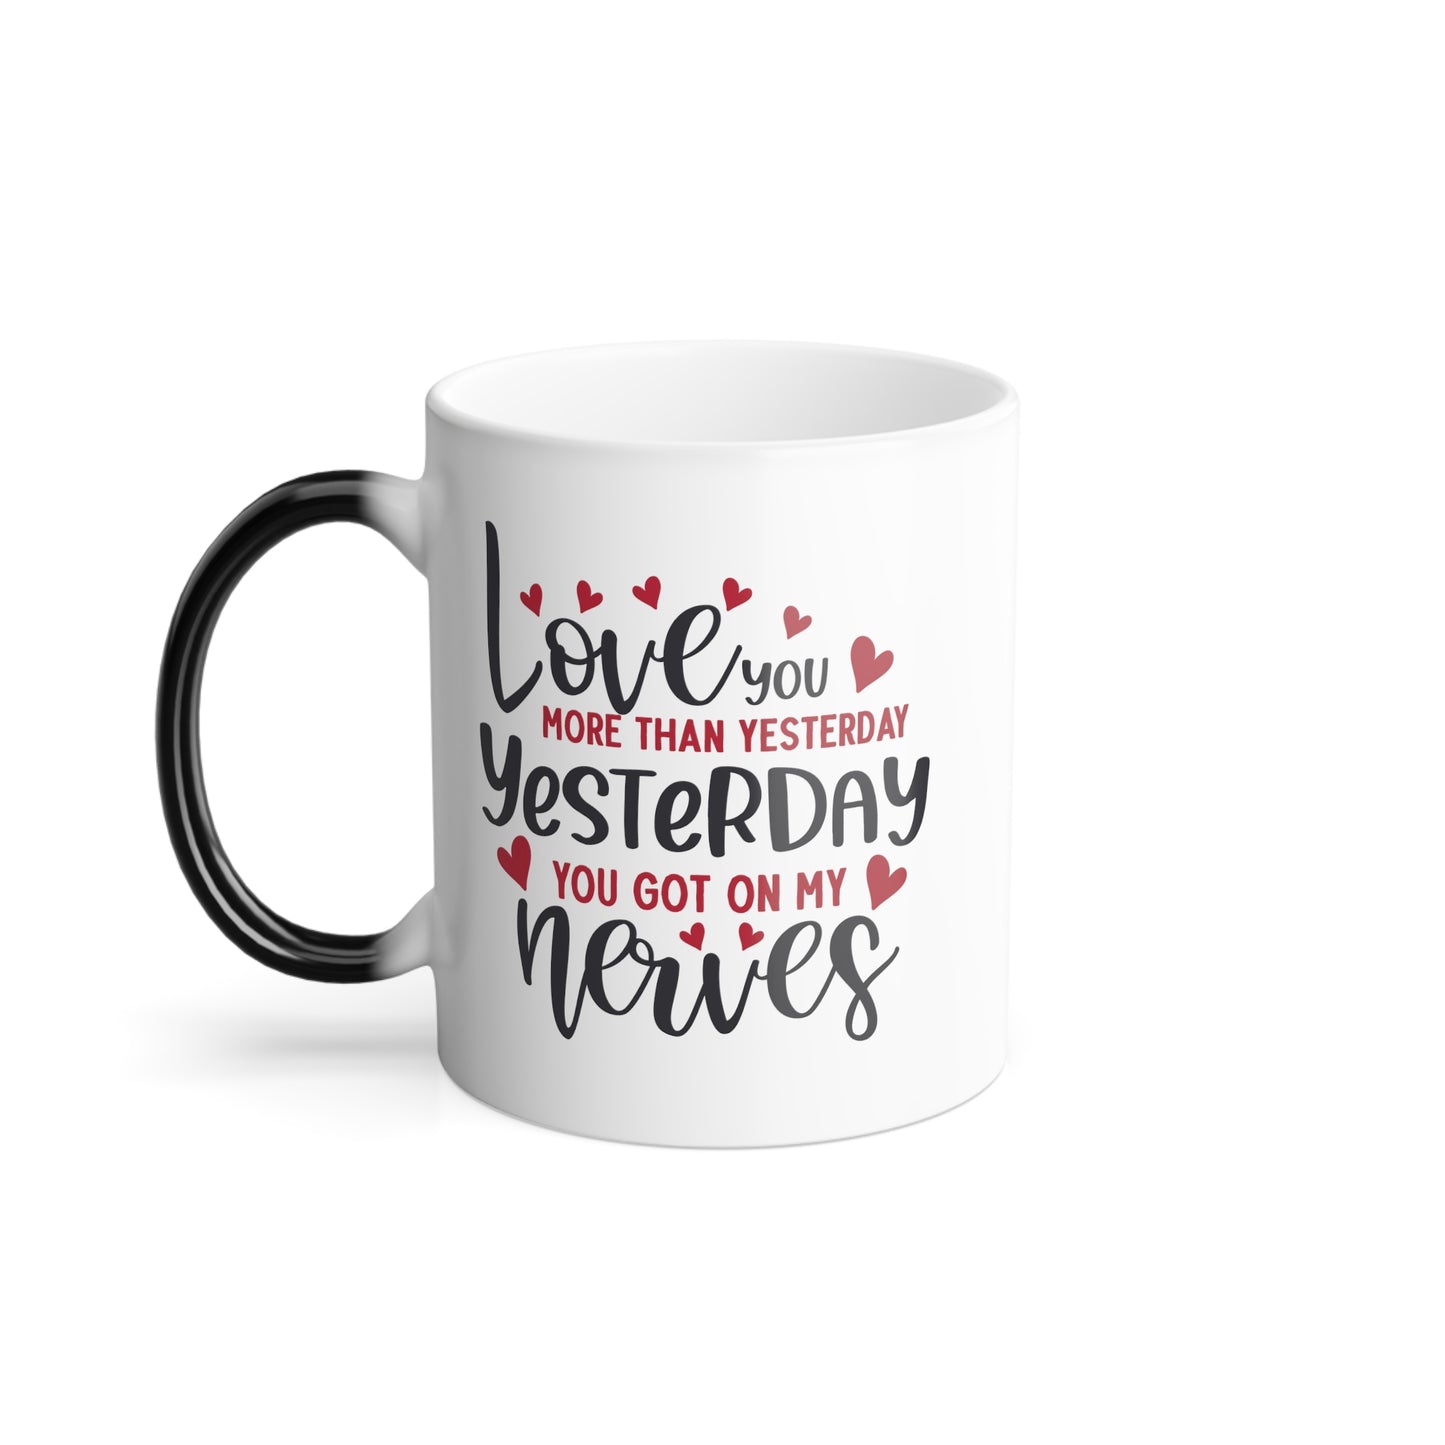 Love You More Than Yesterday Yesterday You Got On My Nerves Color Morphing Mug, 11oz